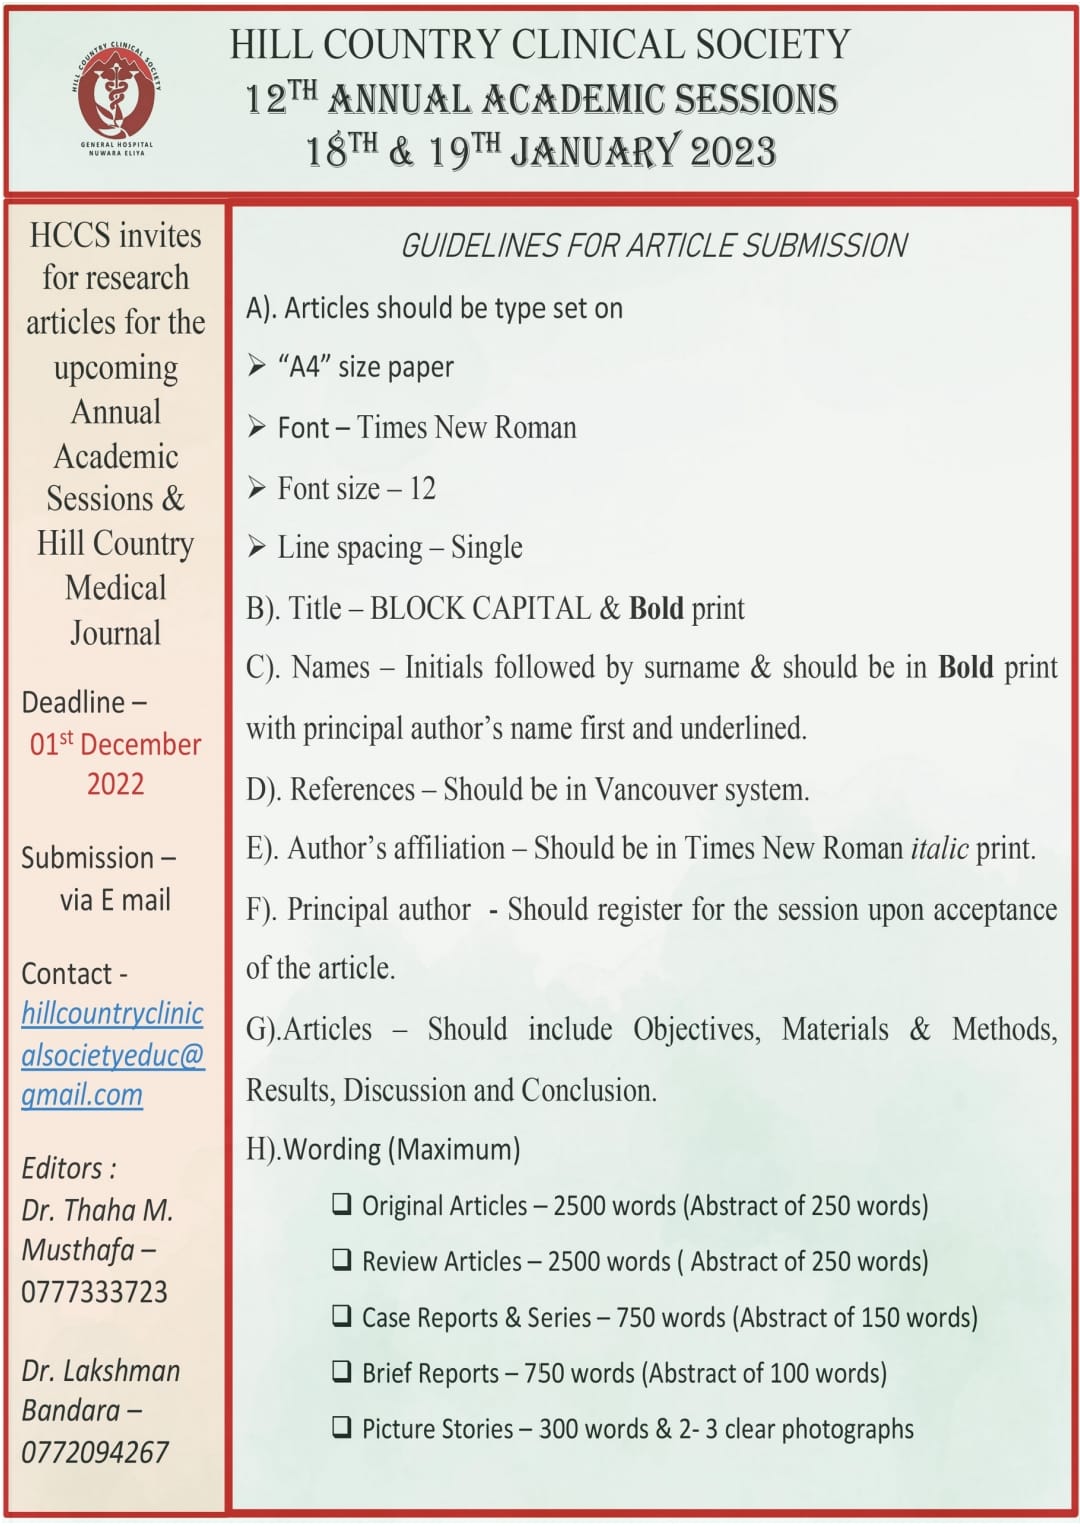 Instructions to authors on submission of articles for The Annual Academic Sessions & Hill Country Medical Journal